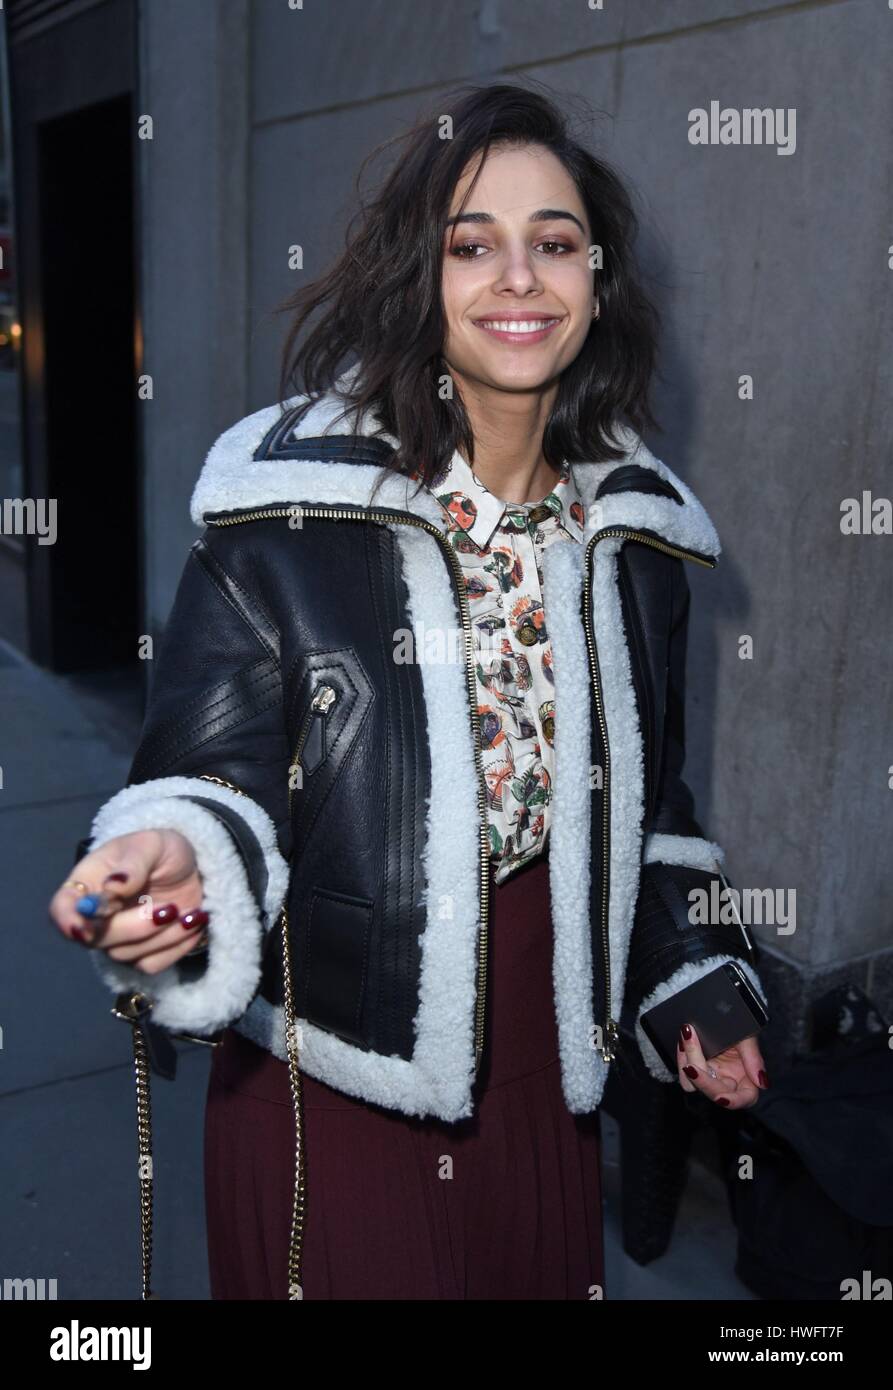 New York, NY, USA. 20th Mar, 2017. Naomi Scott out and about for Celebrity Candids - MON, New York, NY March 20, 2017. Credit: Derek Storm/Everett Collection/Alamy Live News Stock Photo